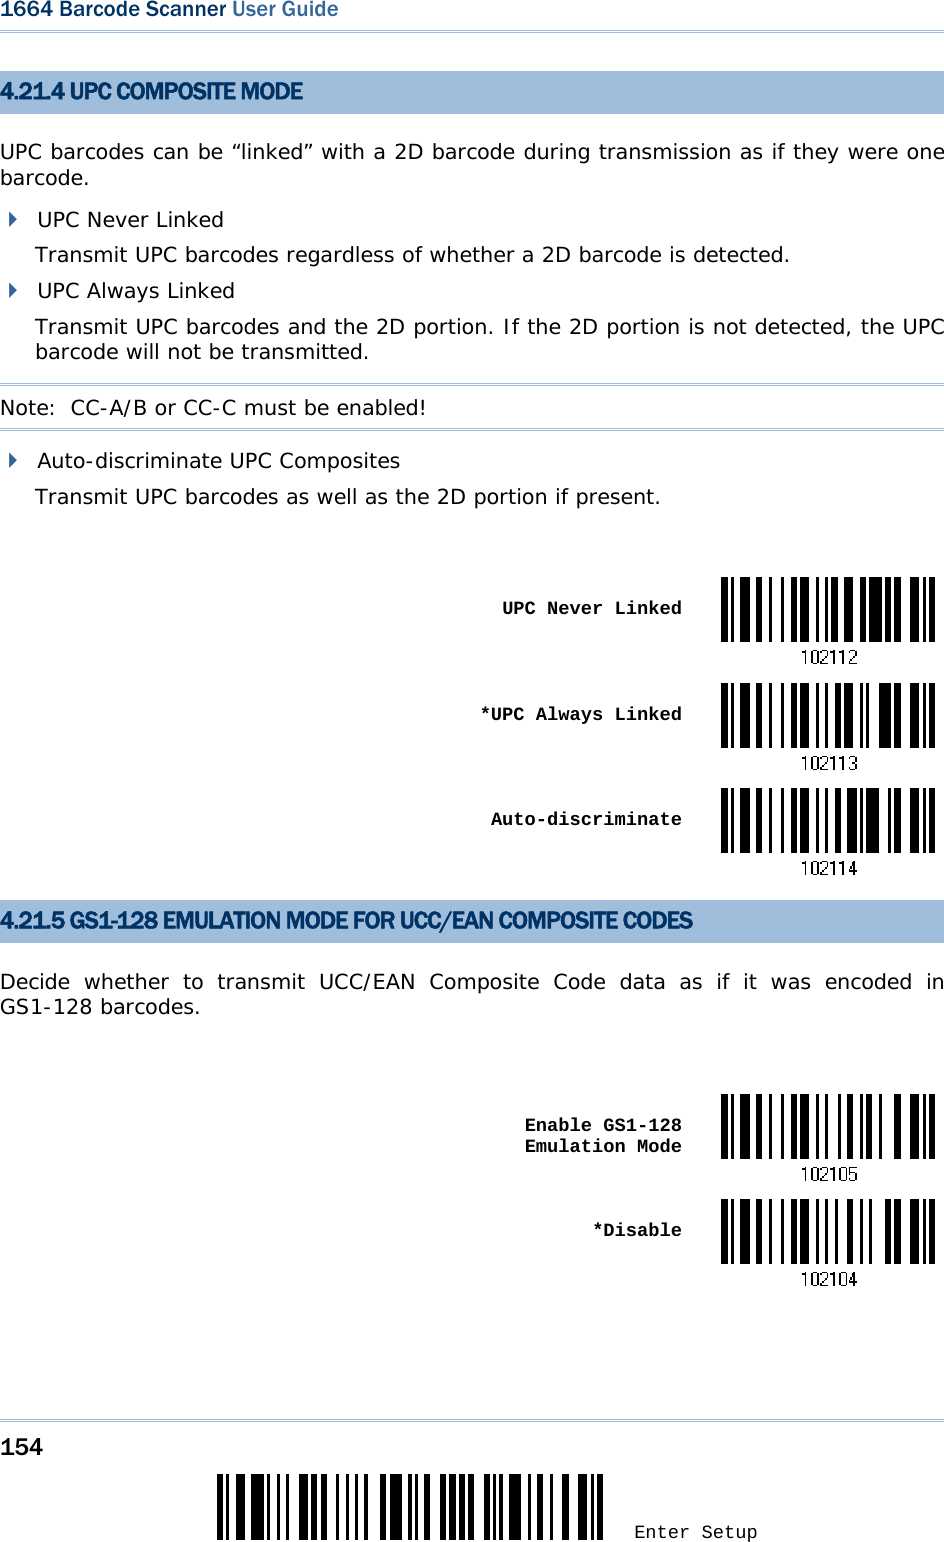 154 Enter Setup 1664 Barcode Scanner User Guide  4.21.4 UPC COMPOSITE MODE UPC barcodes can be “linked” with a 2D barcode during transmission as if they were one barcode.  UPC Never Linked Transmit UPC barcodes regardless of whether a 2D barcode is detected.  UPC Always Linked Transmit UPC barcodes and the 2D portion. If the 2D portion is not detected, the UPC barcode will not be transmitted. Note:  CC-A/B or CC-C must be enabled!  Auto-discriminate UPC Composites Transmit UPC barcodes as well as the 2D portion if present.   UPC Never Linked *UPC Always Linked Auto-discriminate4.21.5 GS1-128 EMULATION MODE FOR UCC/EAN COMPOSITE CODES Decide whether to transmit UCC/EAN Composite Code data as if it was encoded in GS1-128 barcodes.   Enable GS1-128 Emulation Mode *Disable  